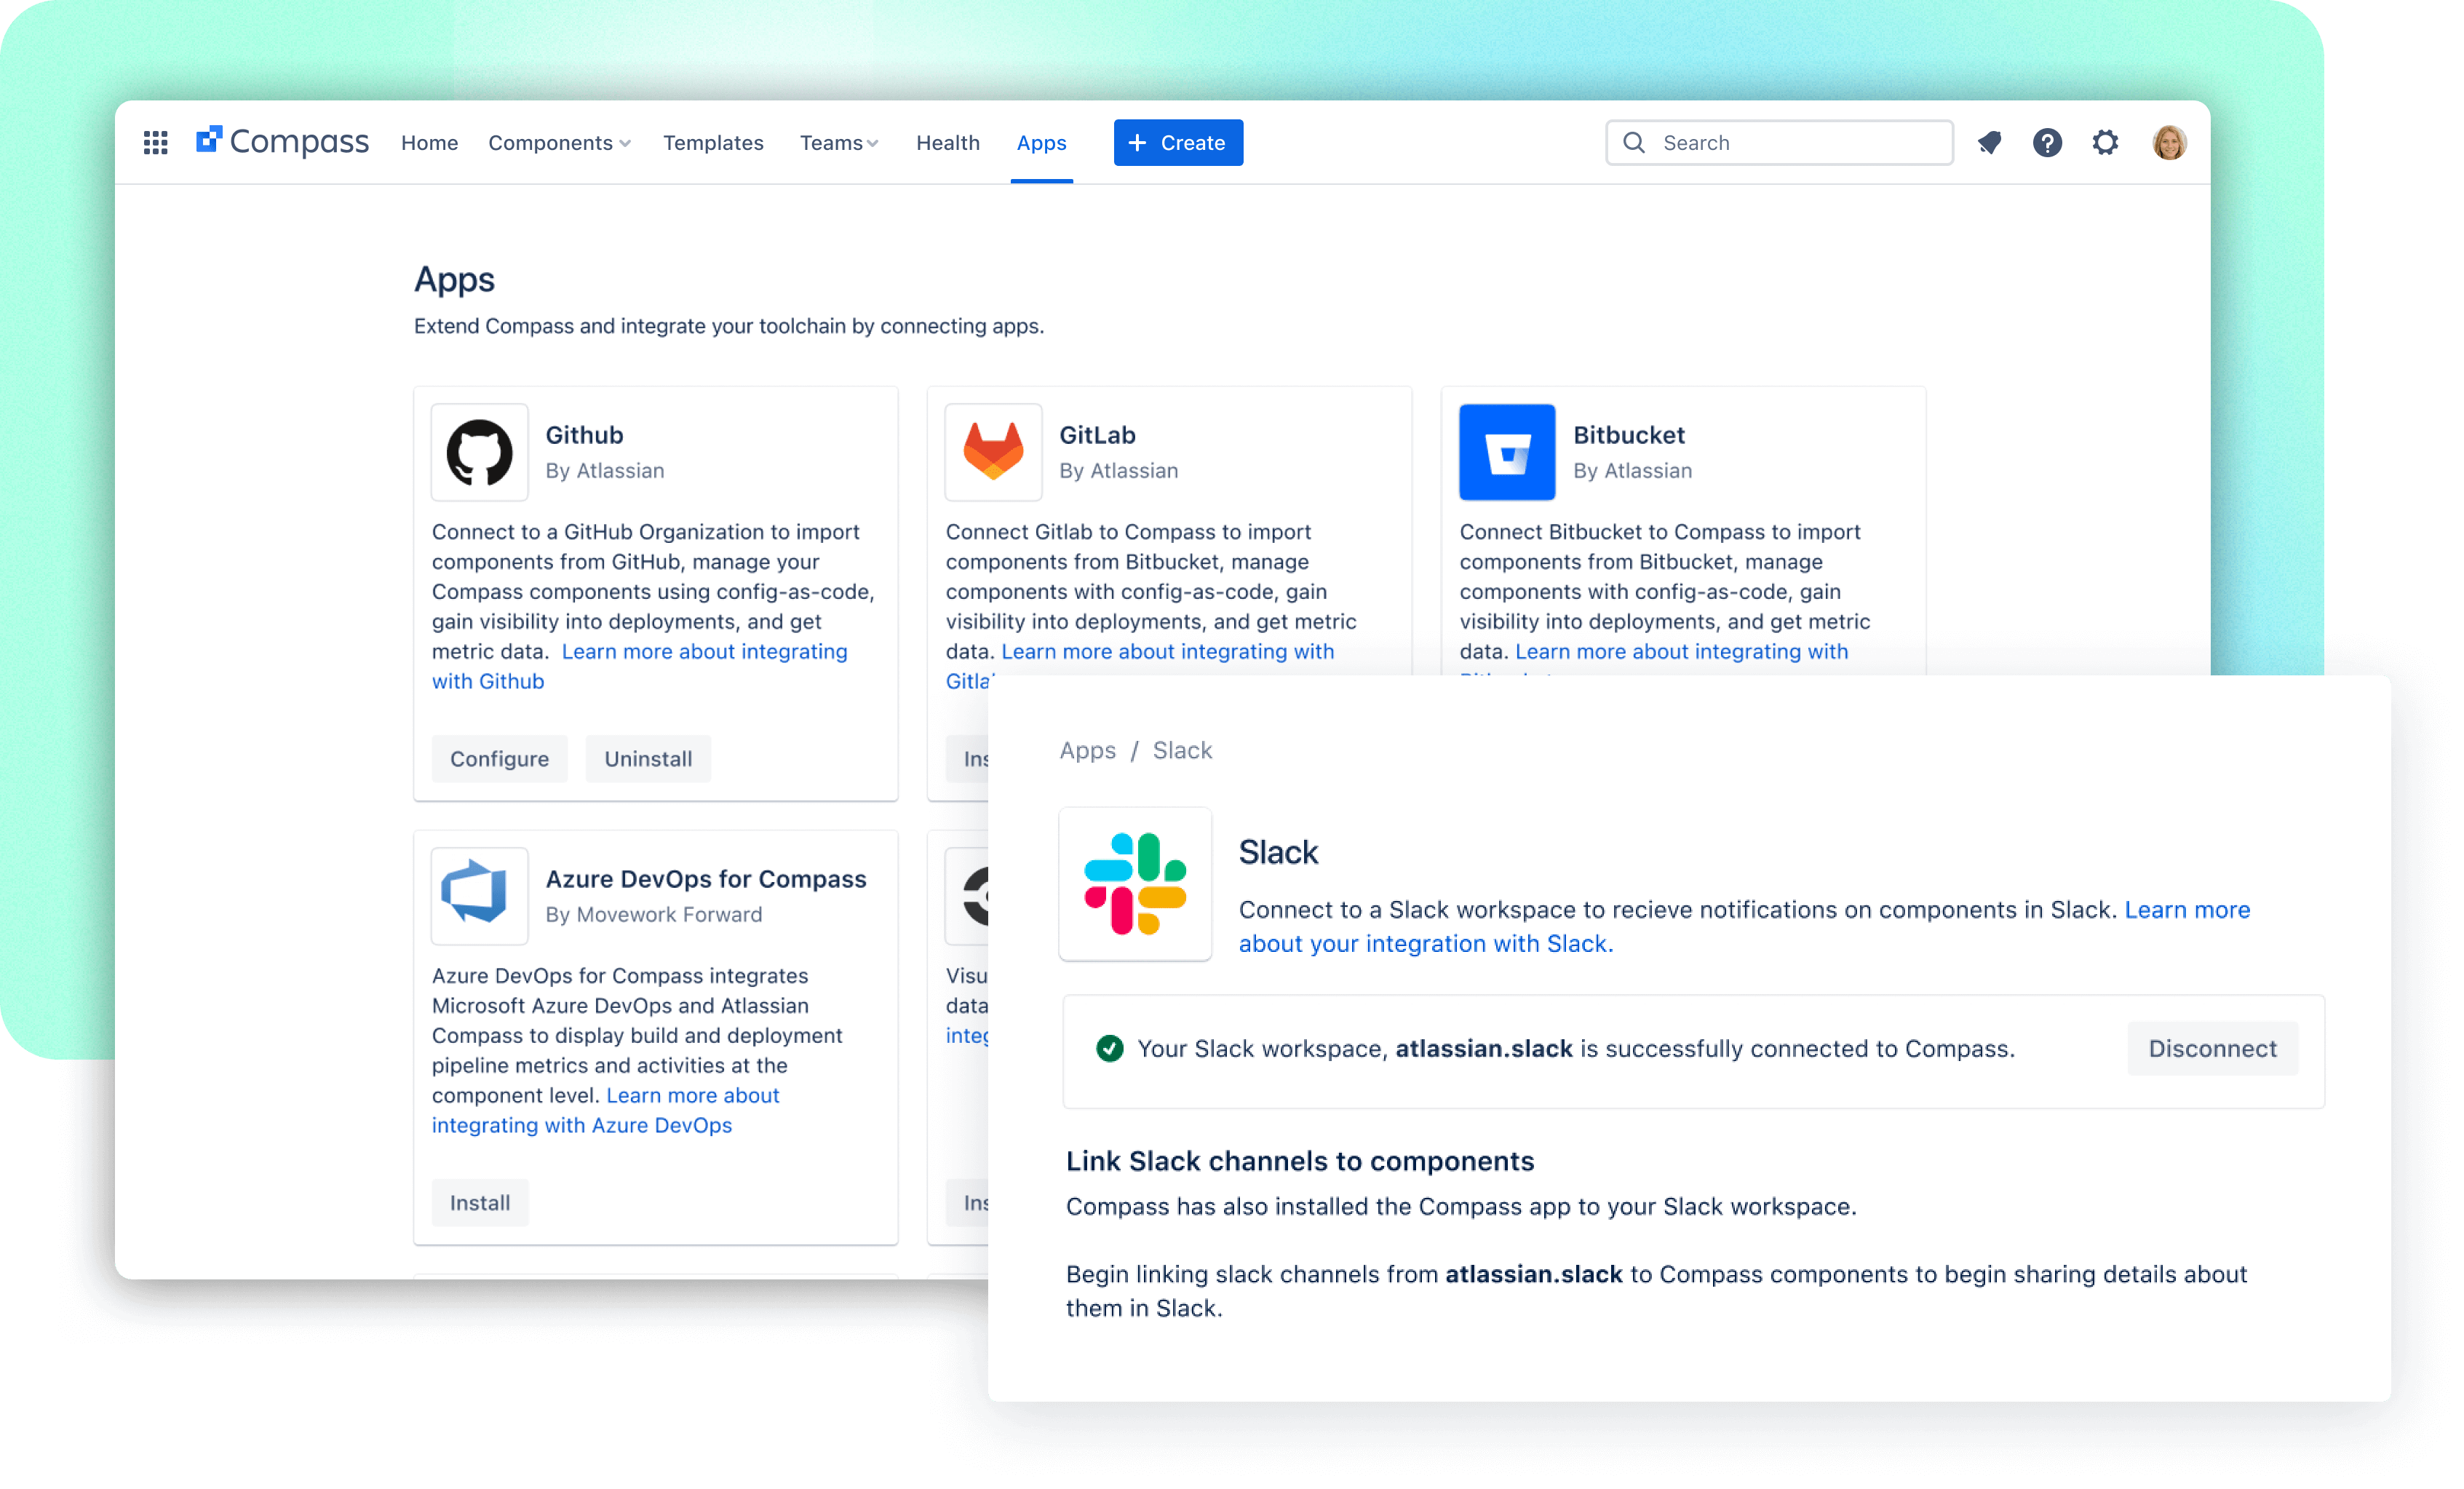 A development platform that brings teams and technologies together: Atlassian Compass is now available! - image showing apps that can be integrated with Atlassian Compass